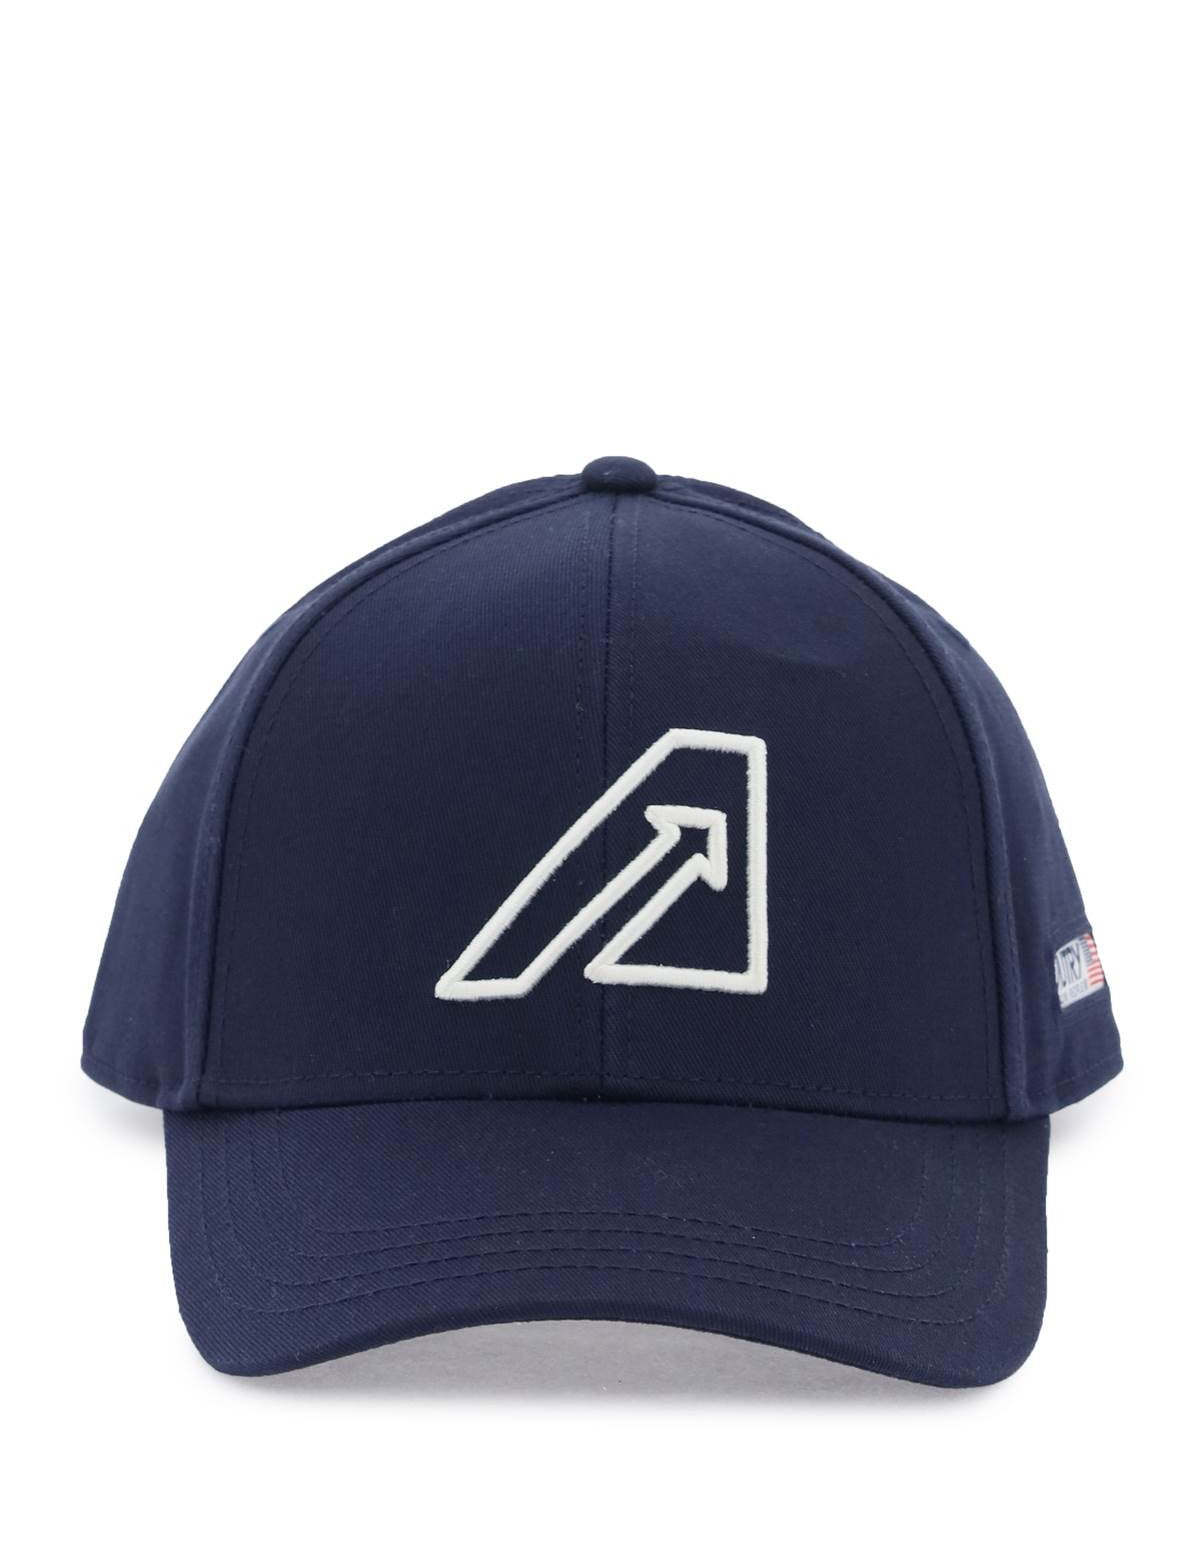 autry-baseball-cap-with-embroidered-logo_bf9db999-567c-4eb3-ba47-c46d6a743d74.jpg